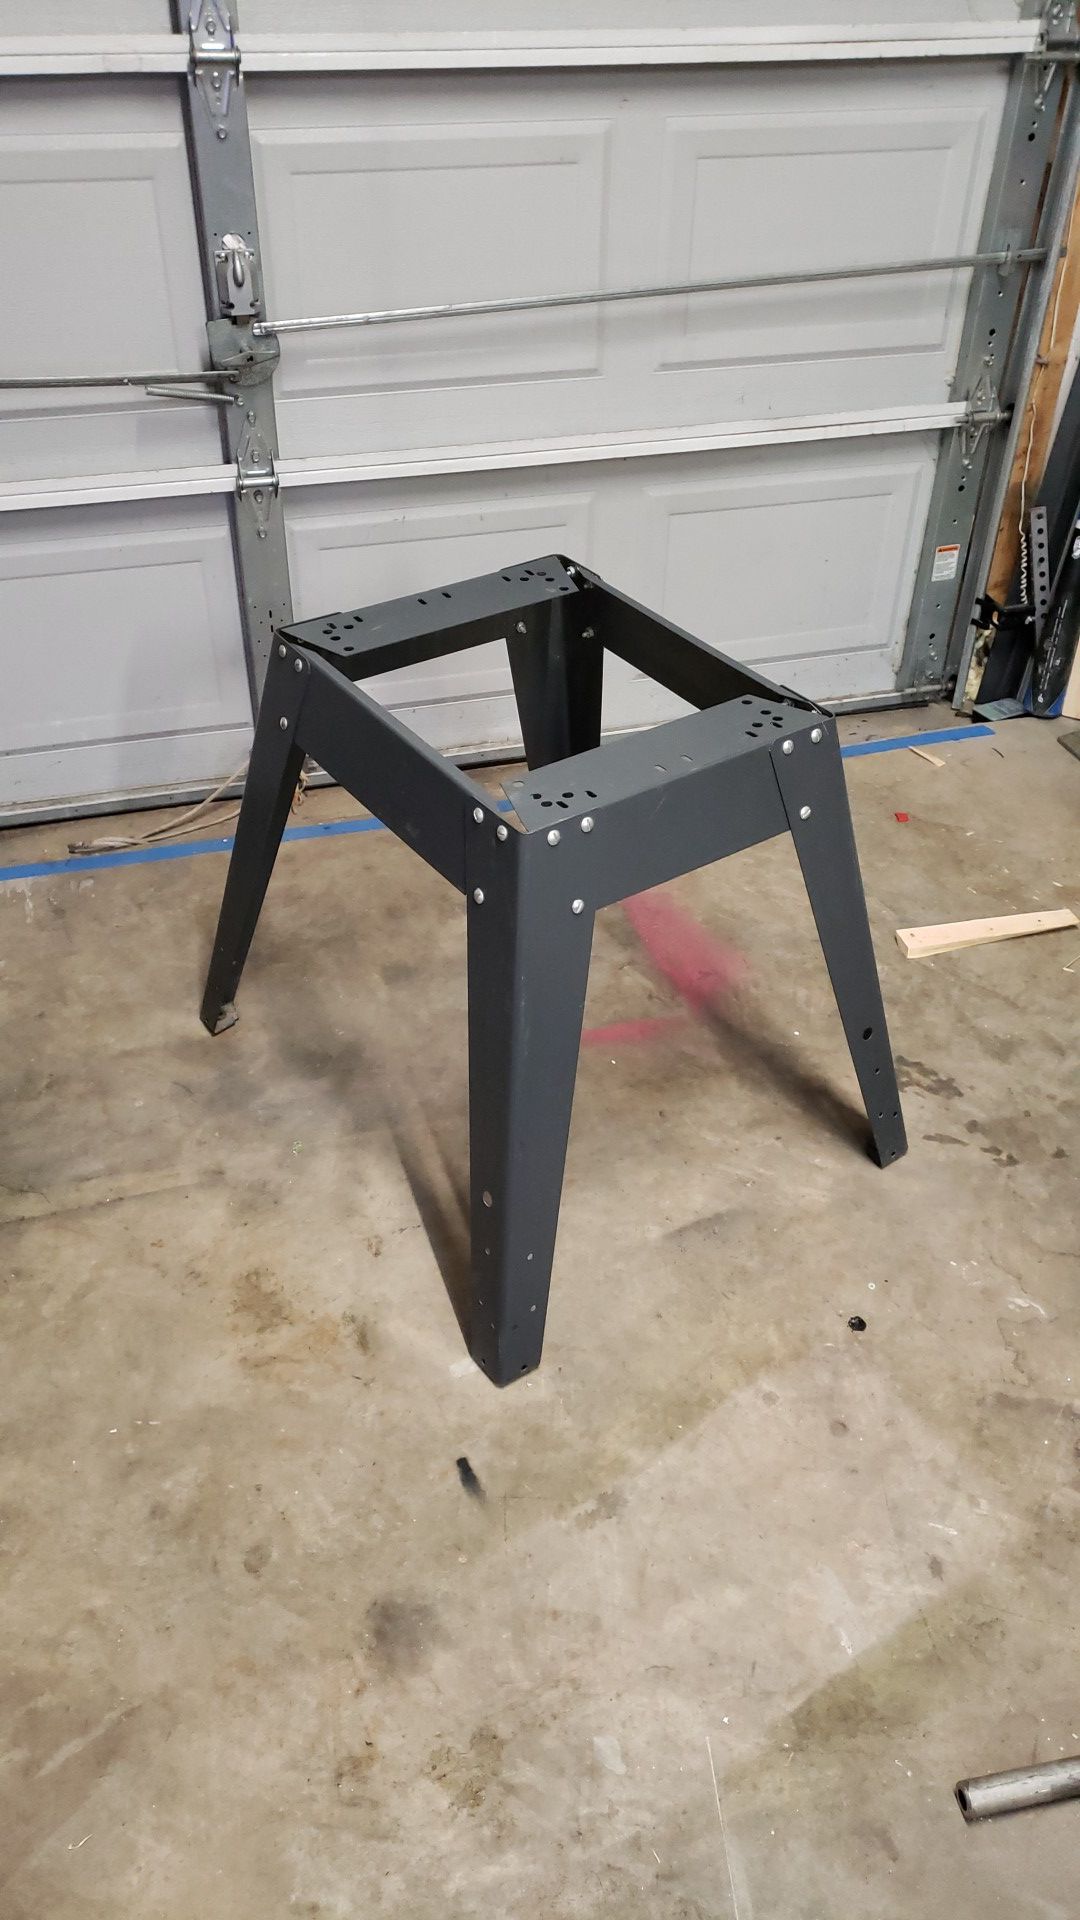 Table saw/ Drill press stand